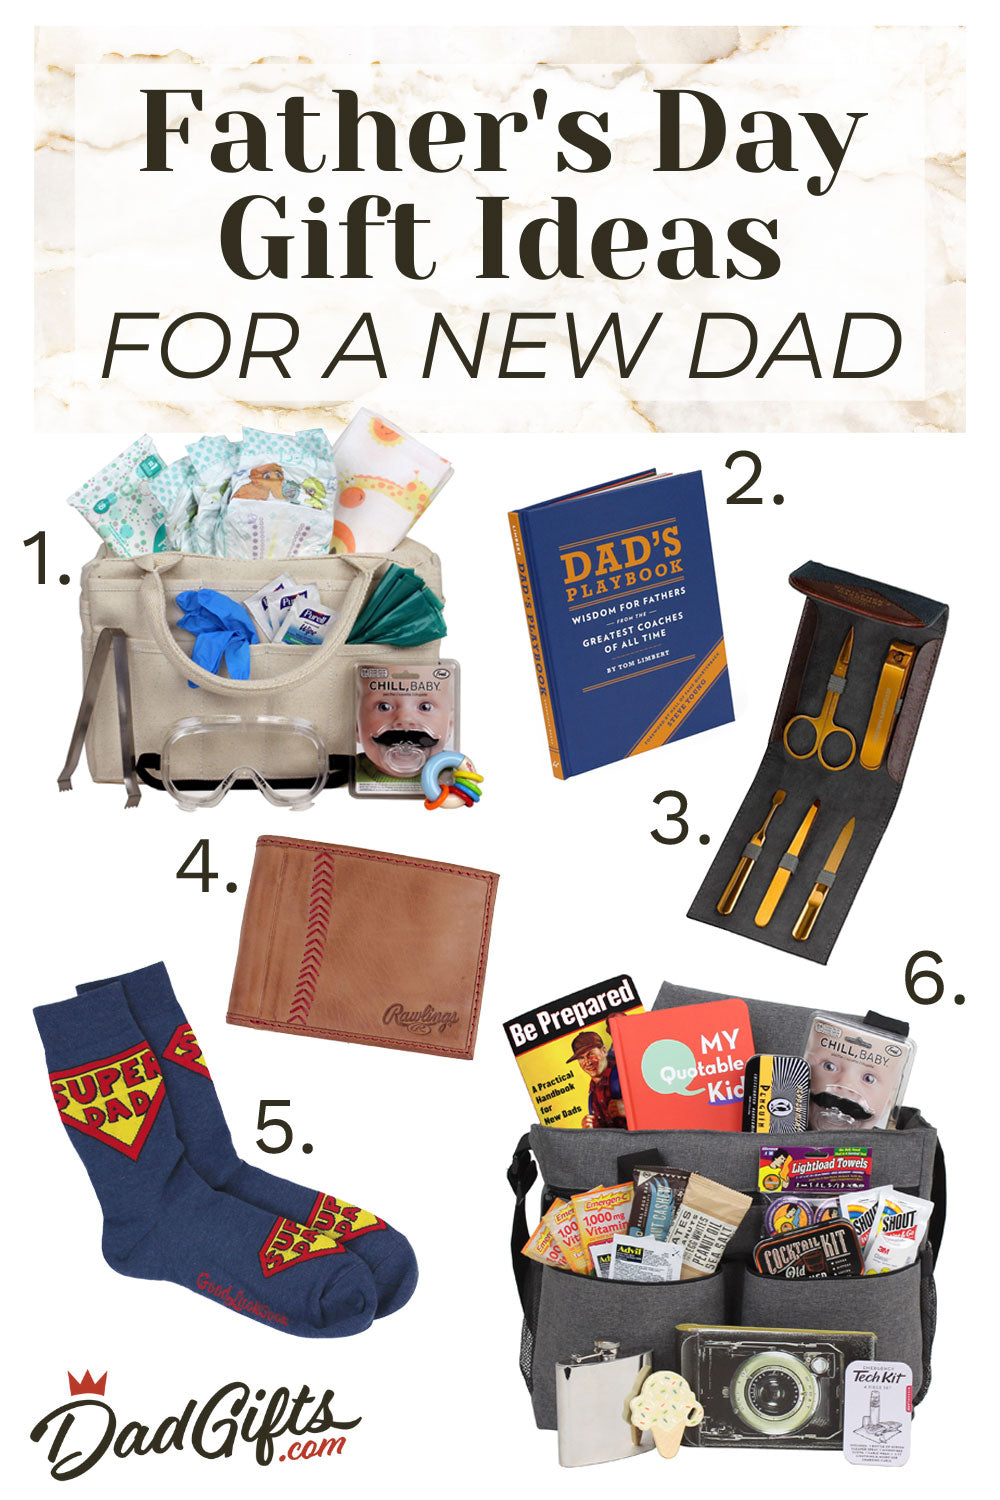 Best Gifts for Dad this Father's Day (Useful & Practical!)